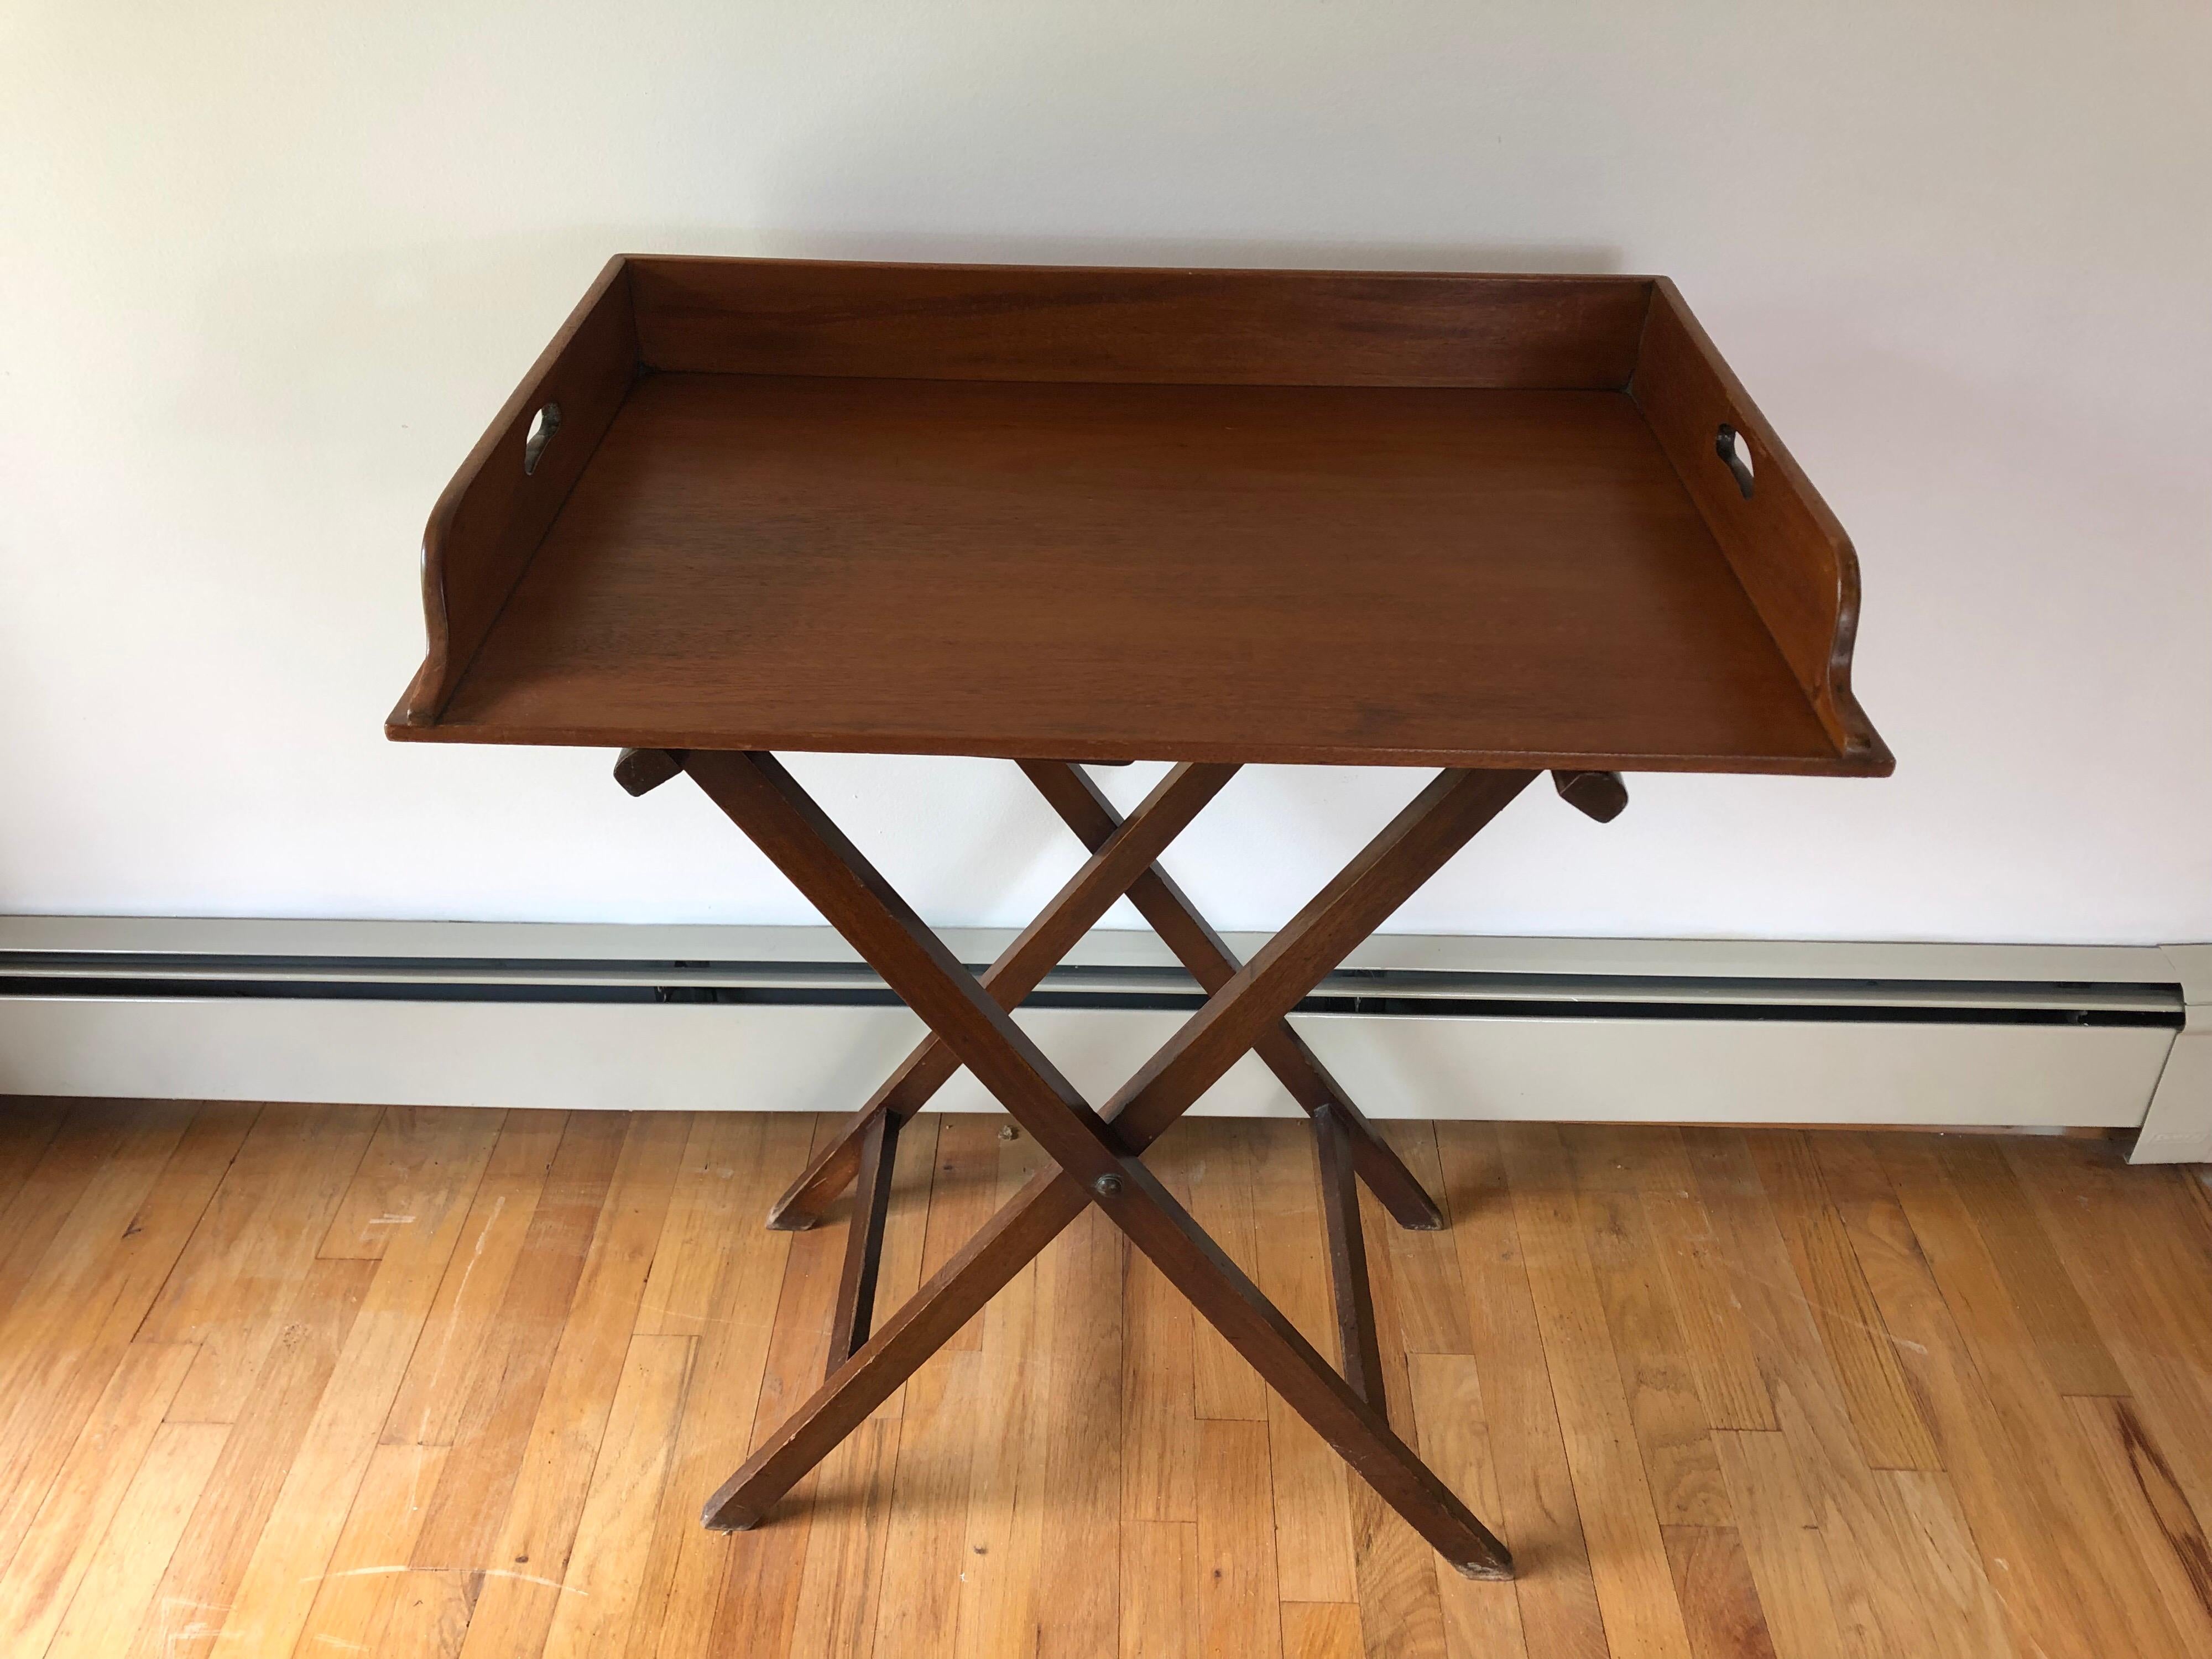 A 19th century English mahogany butler's tray. With removable handled tray top and collapsible base.